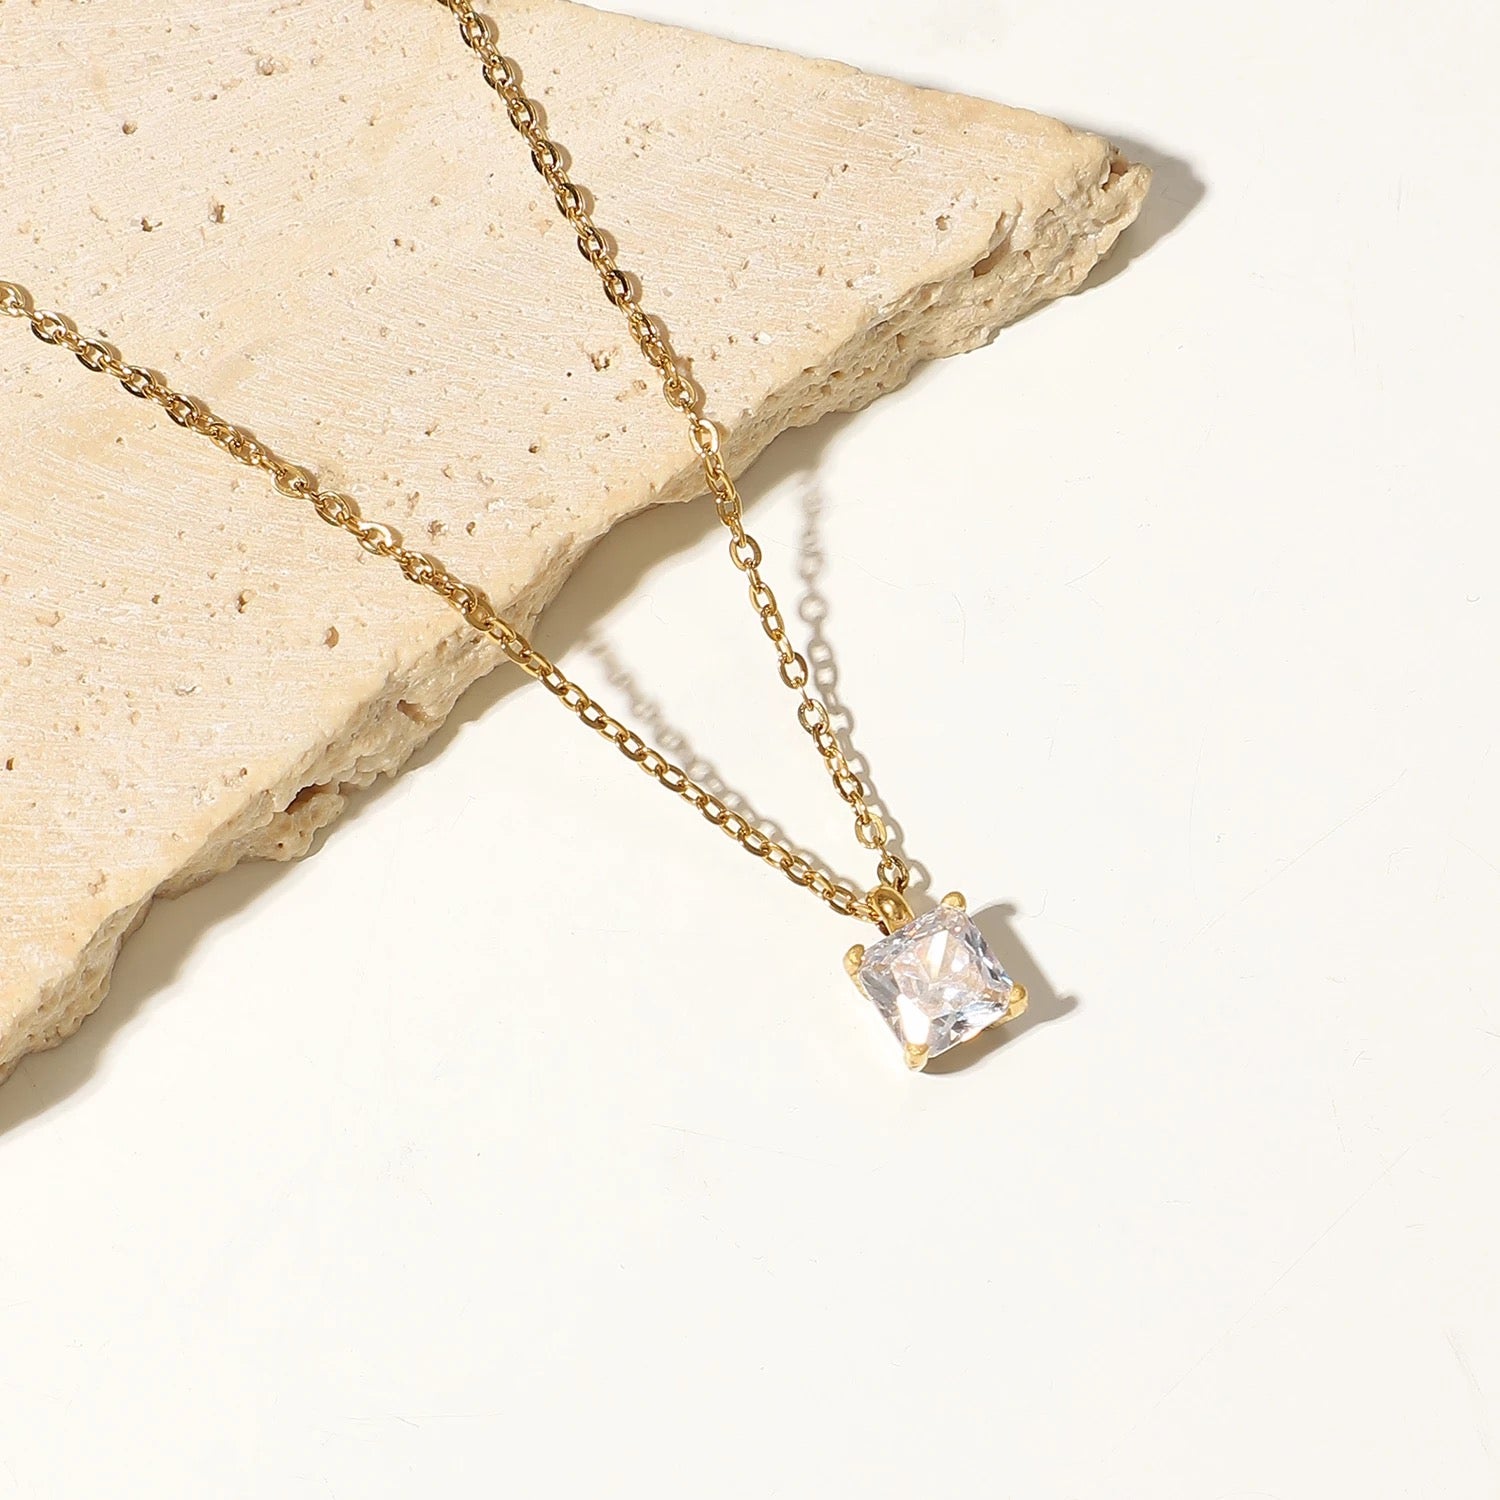 Crushed ice square necklace